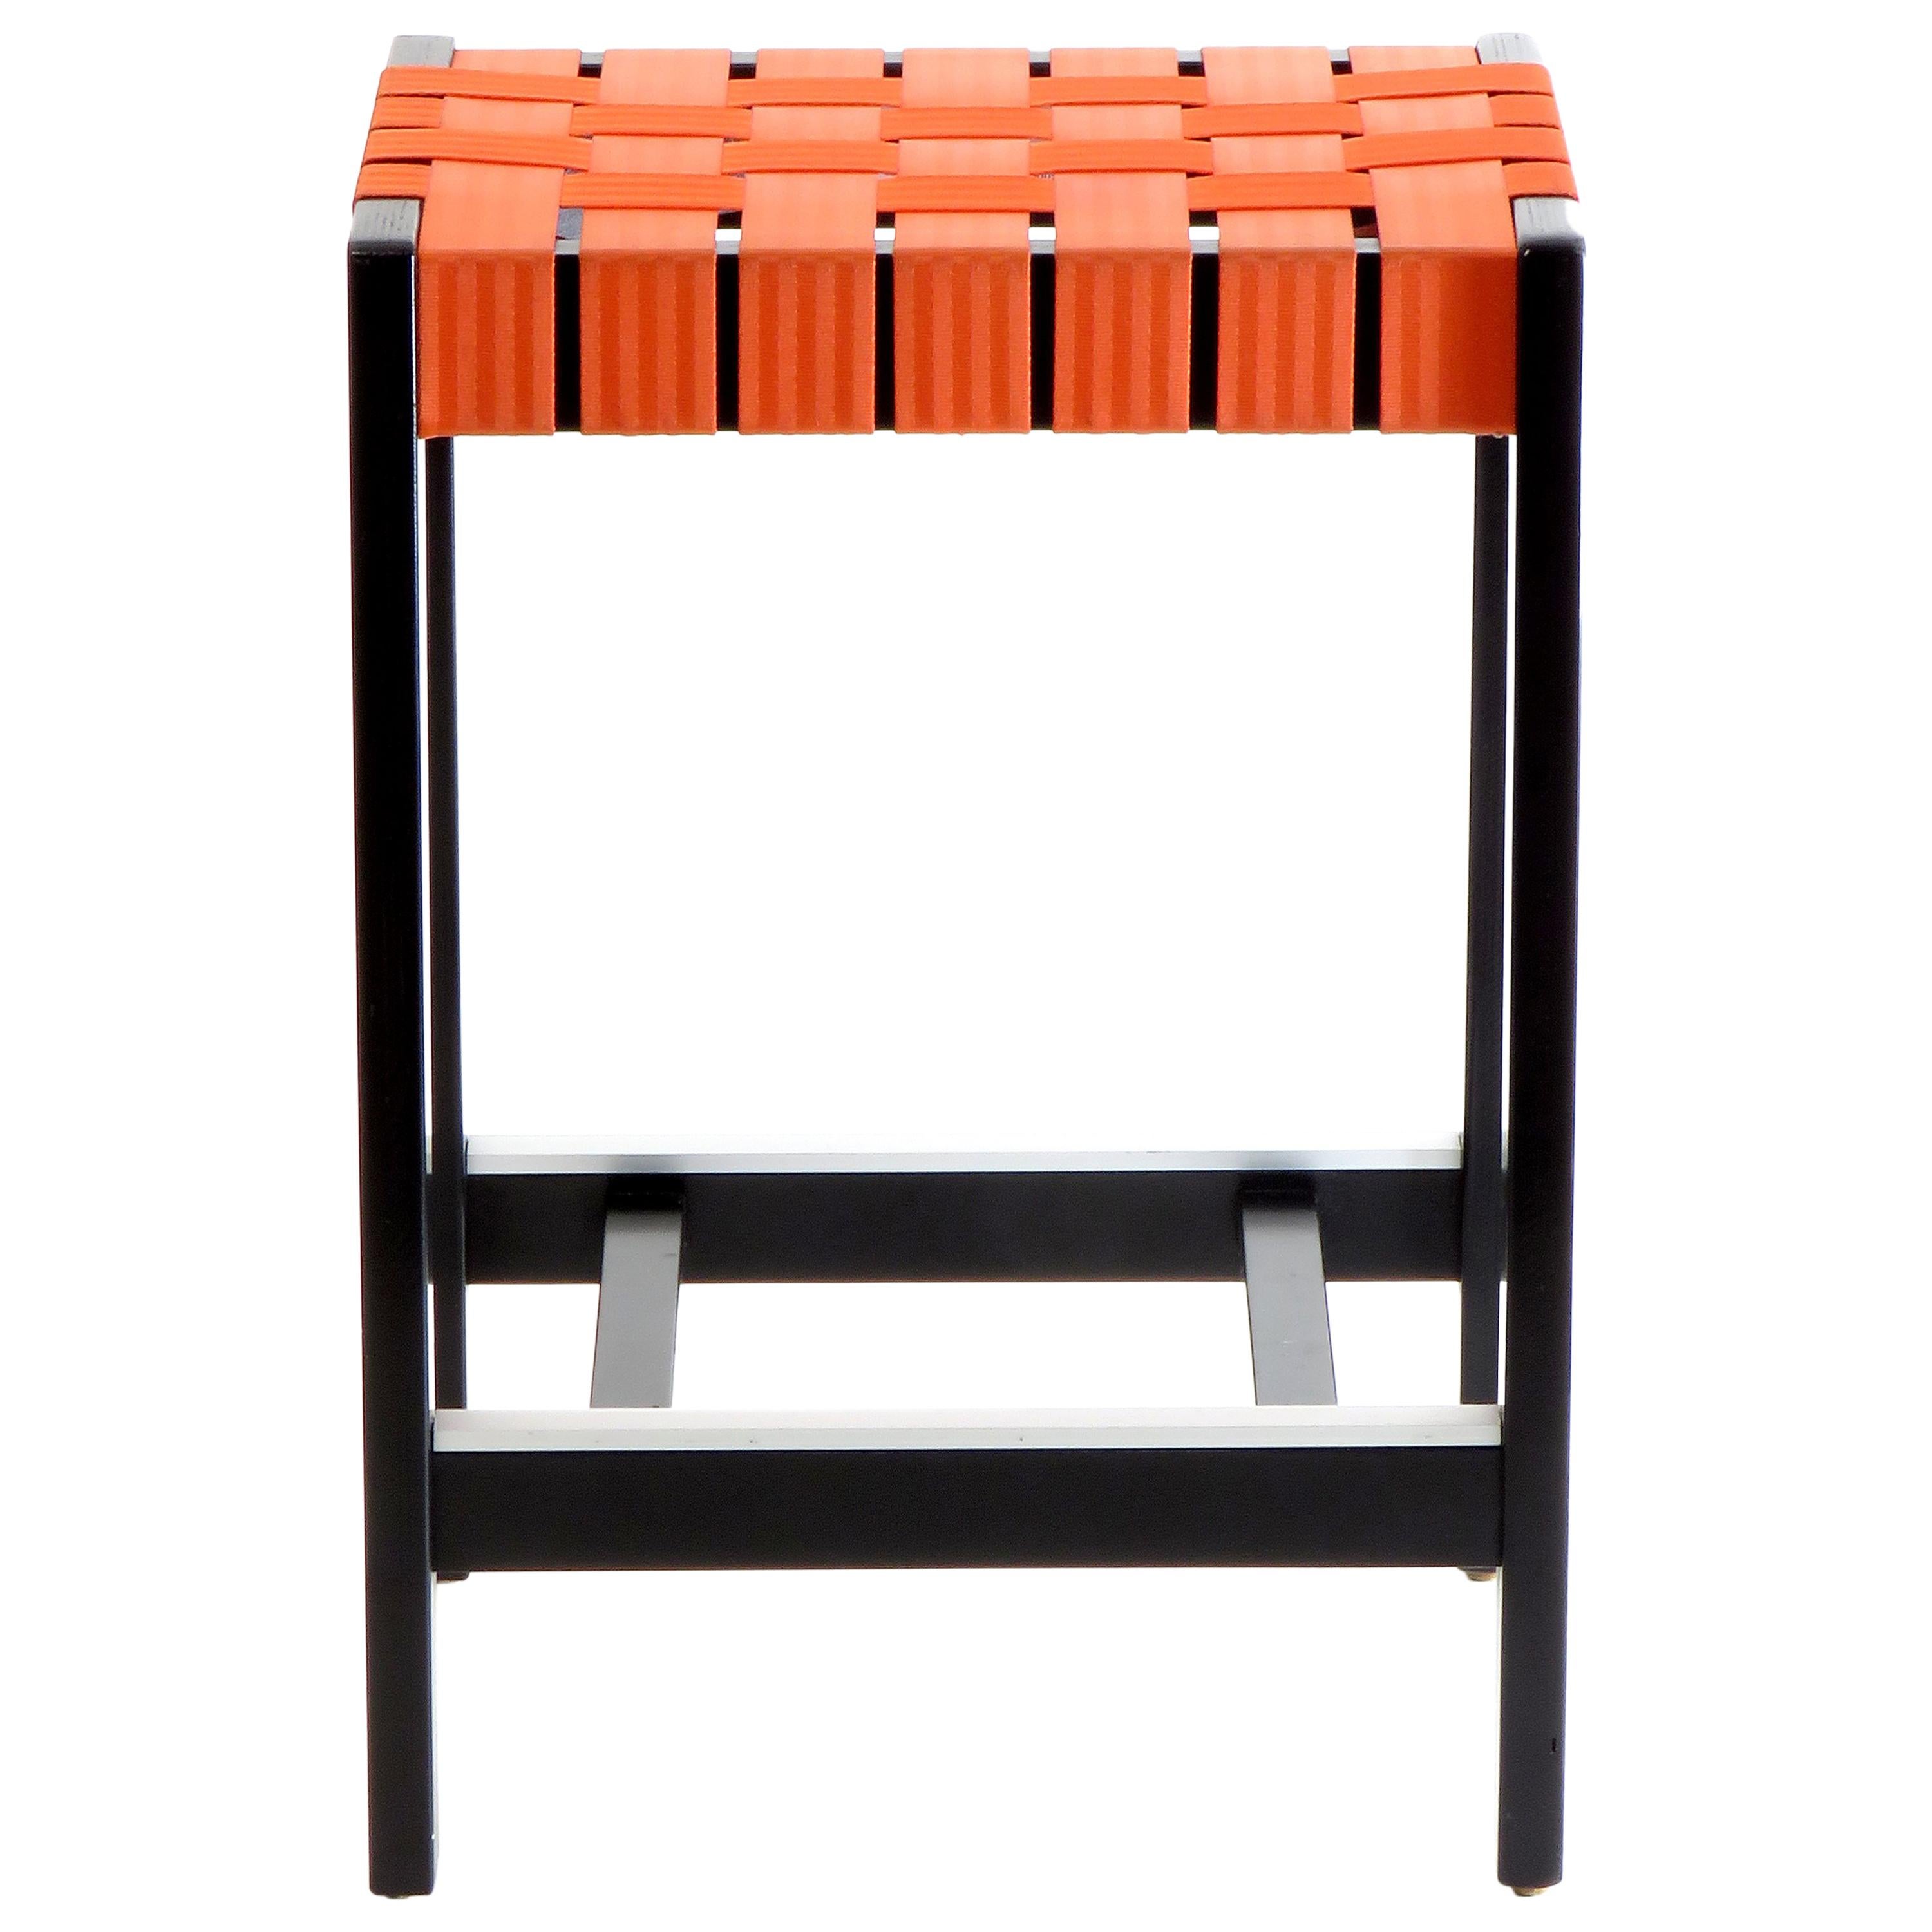 Maple Black Finish Bar Stool with Orange Woven Seat Made in USA by Peter Danko For Sale